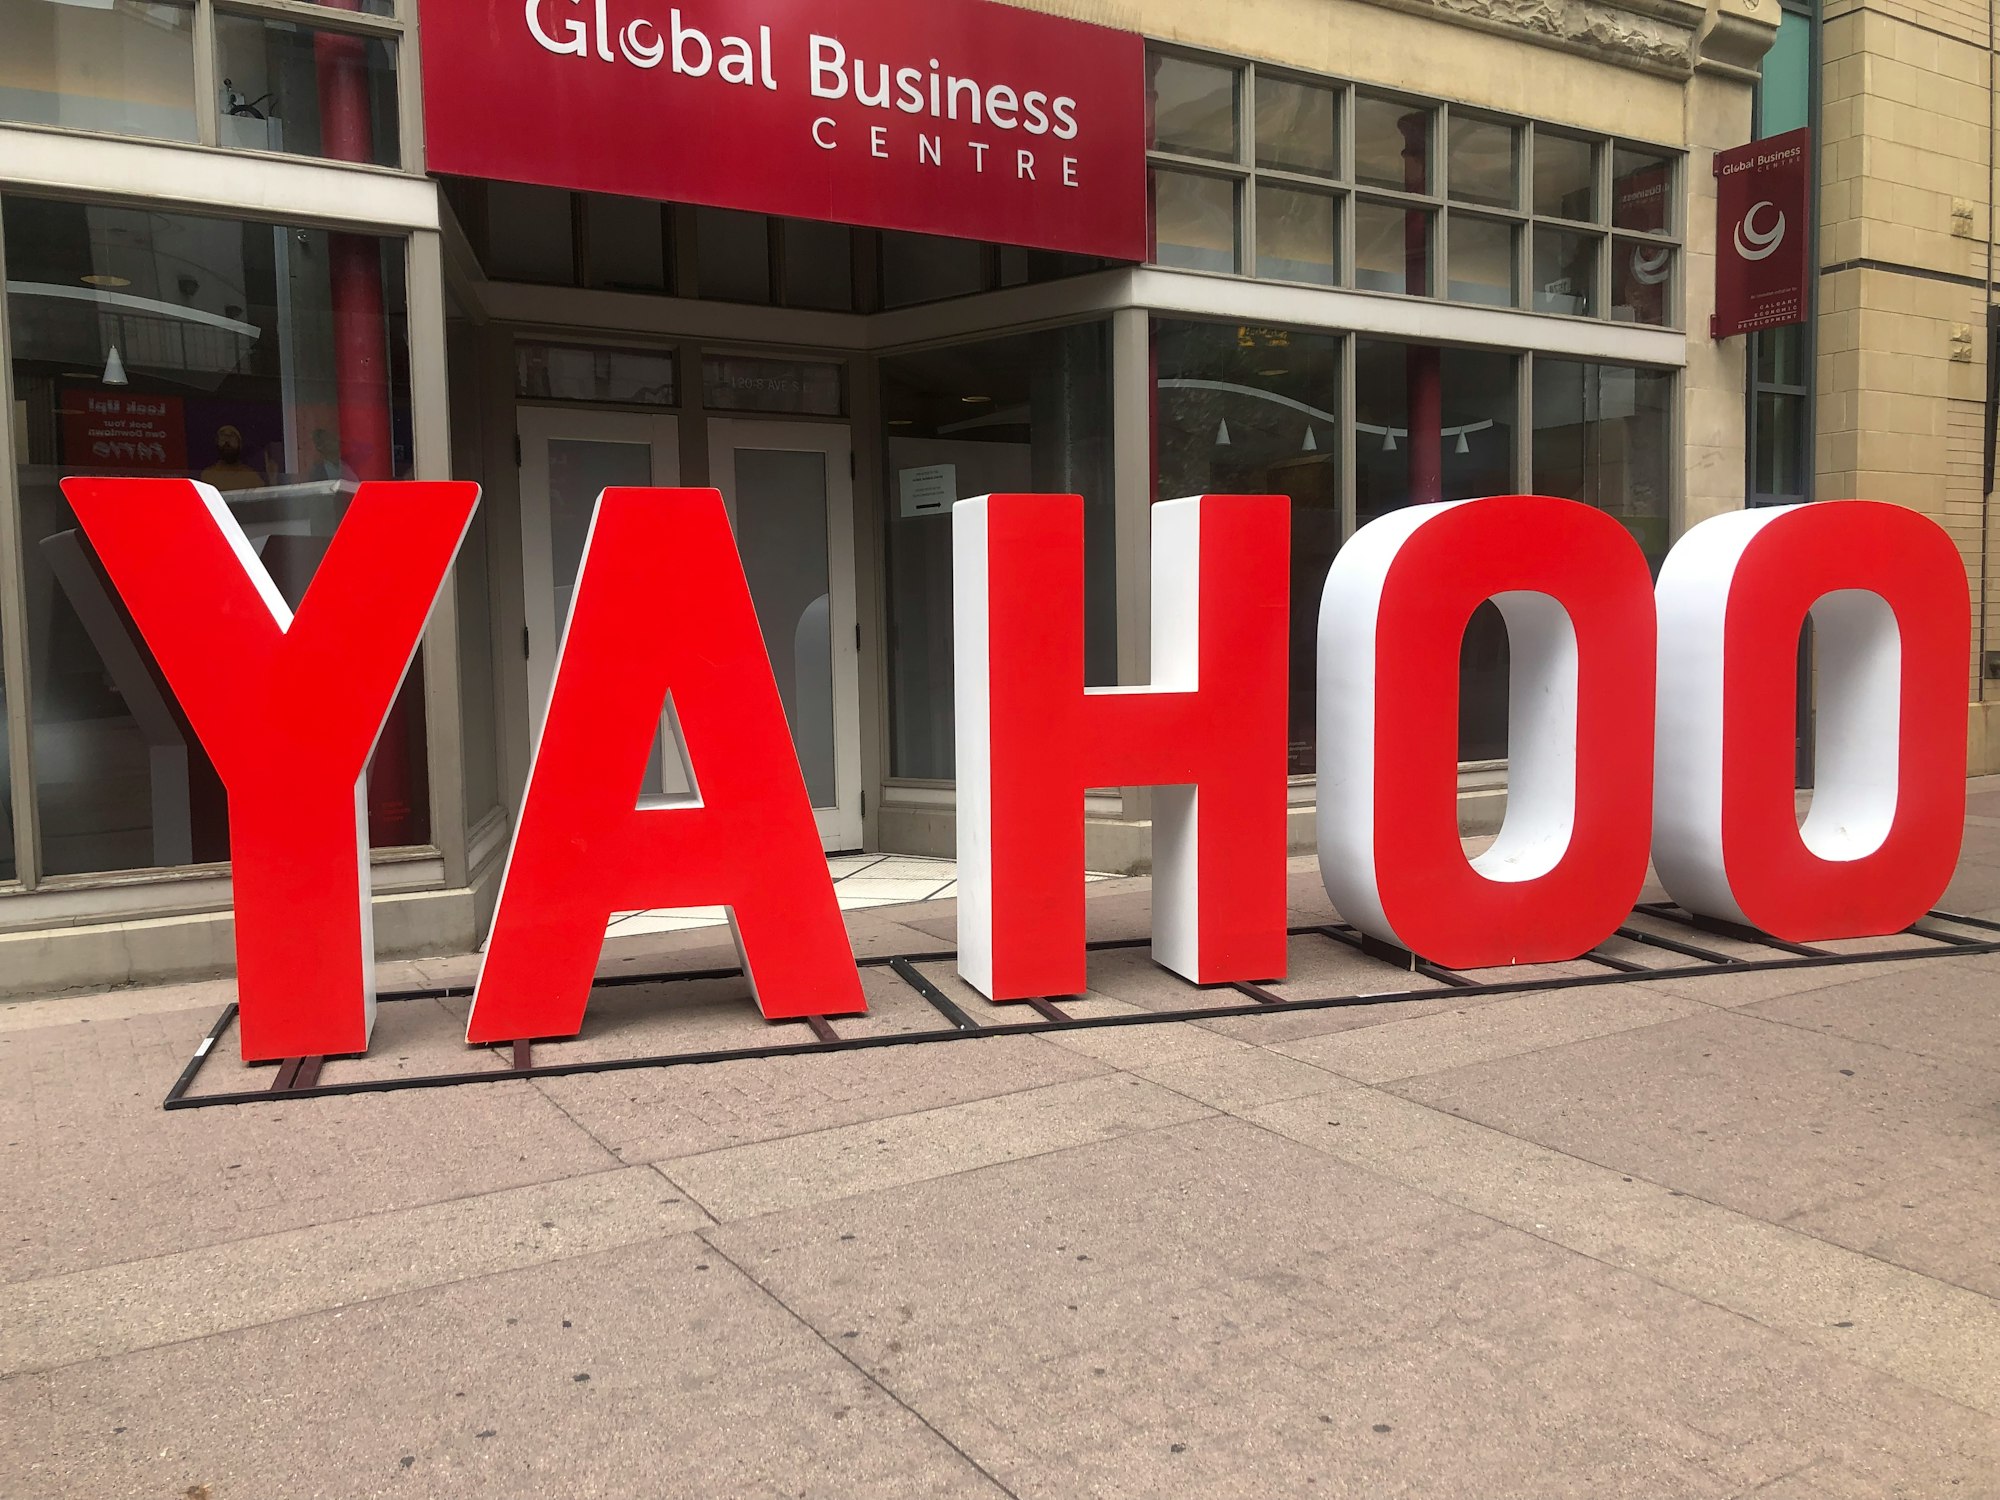 Yahoo Mail for All: Introducing Our New Mobile Web